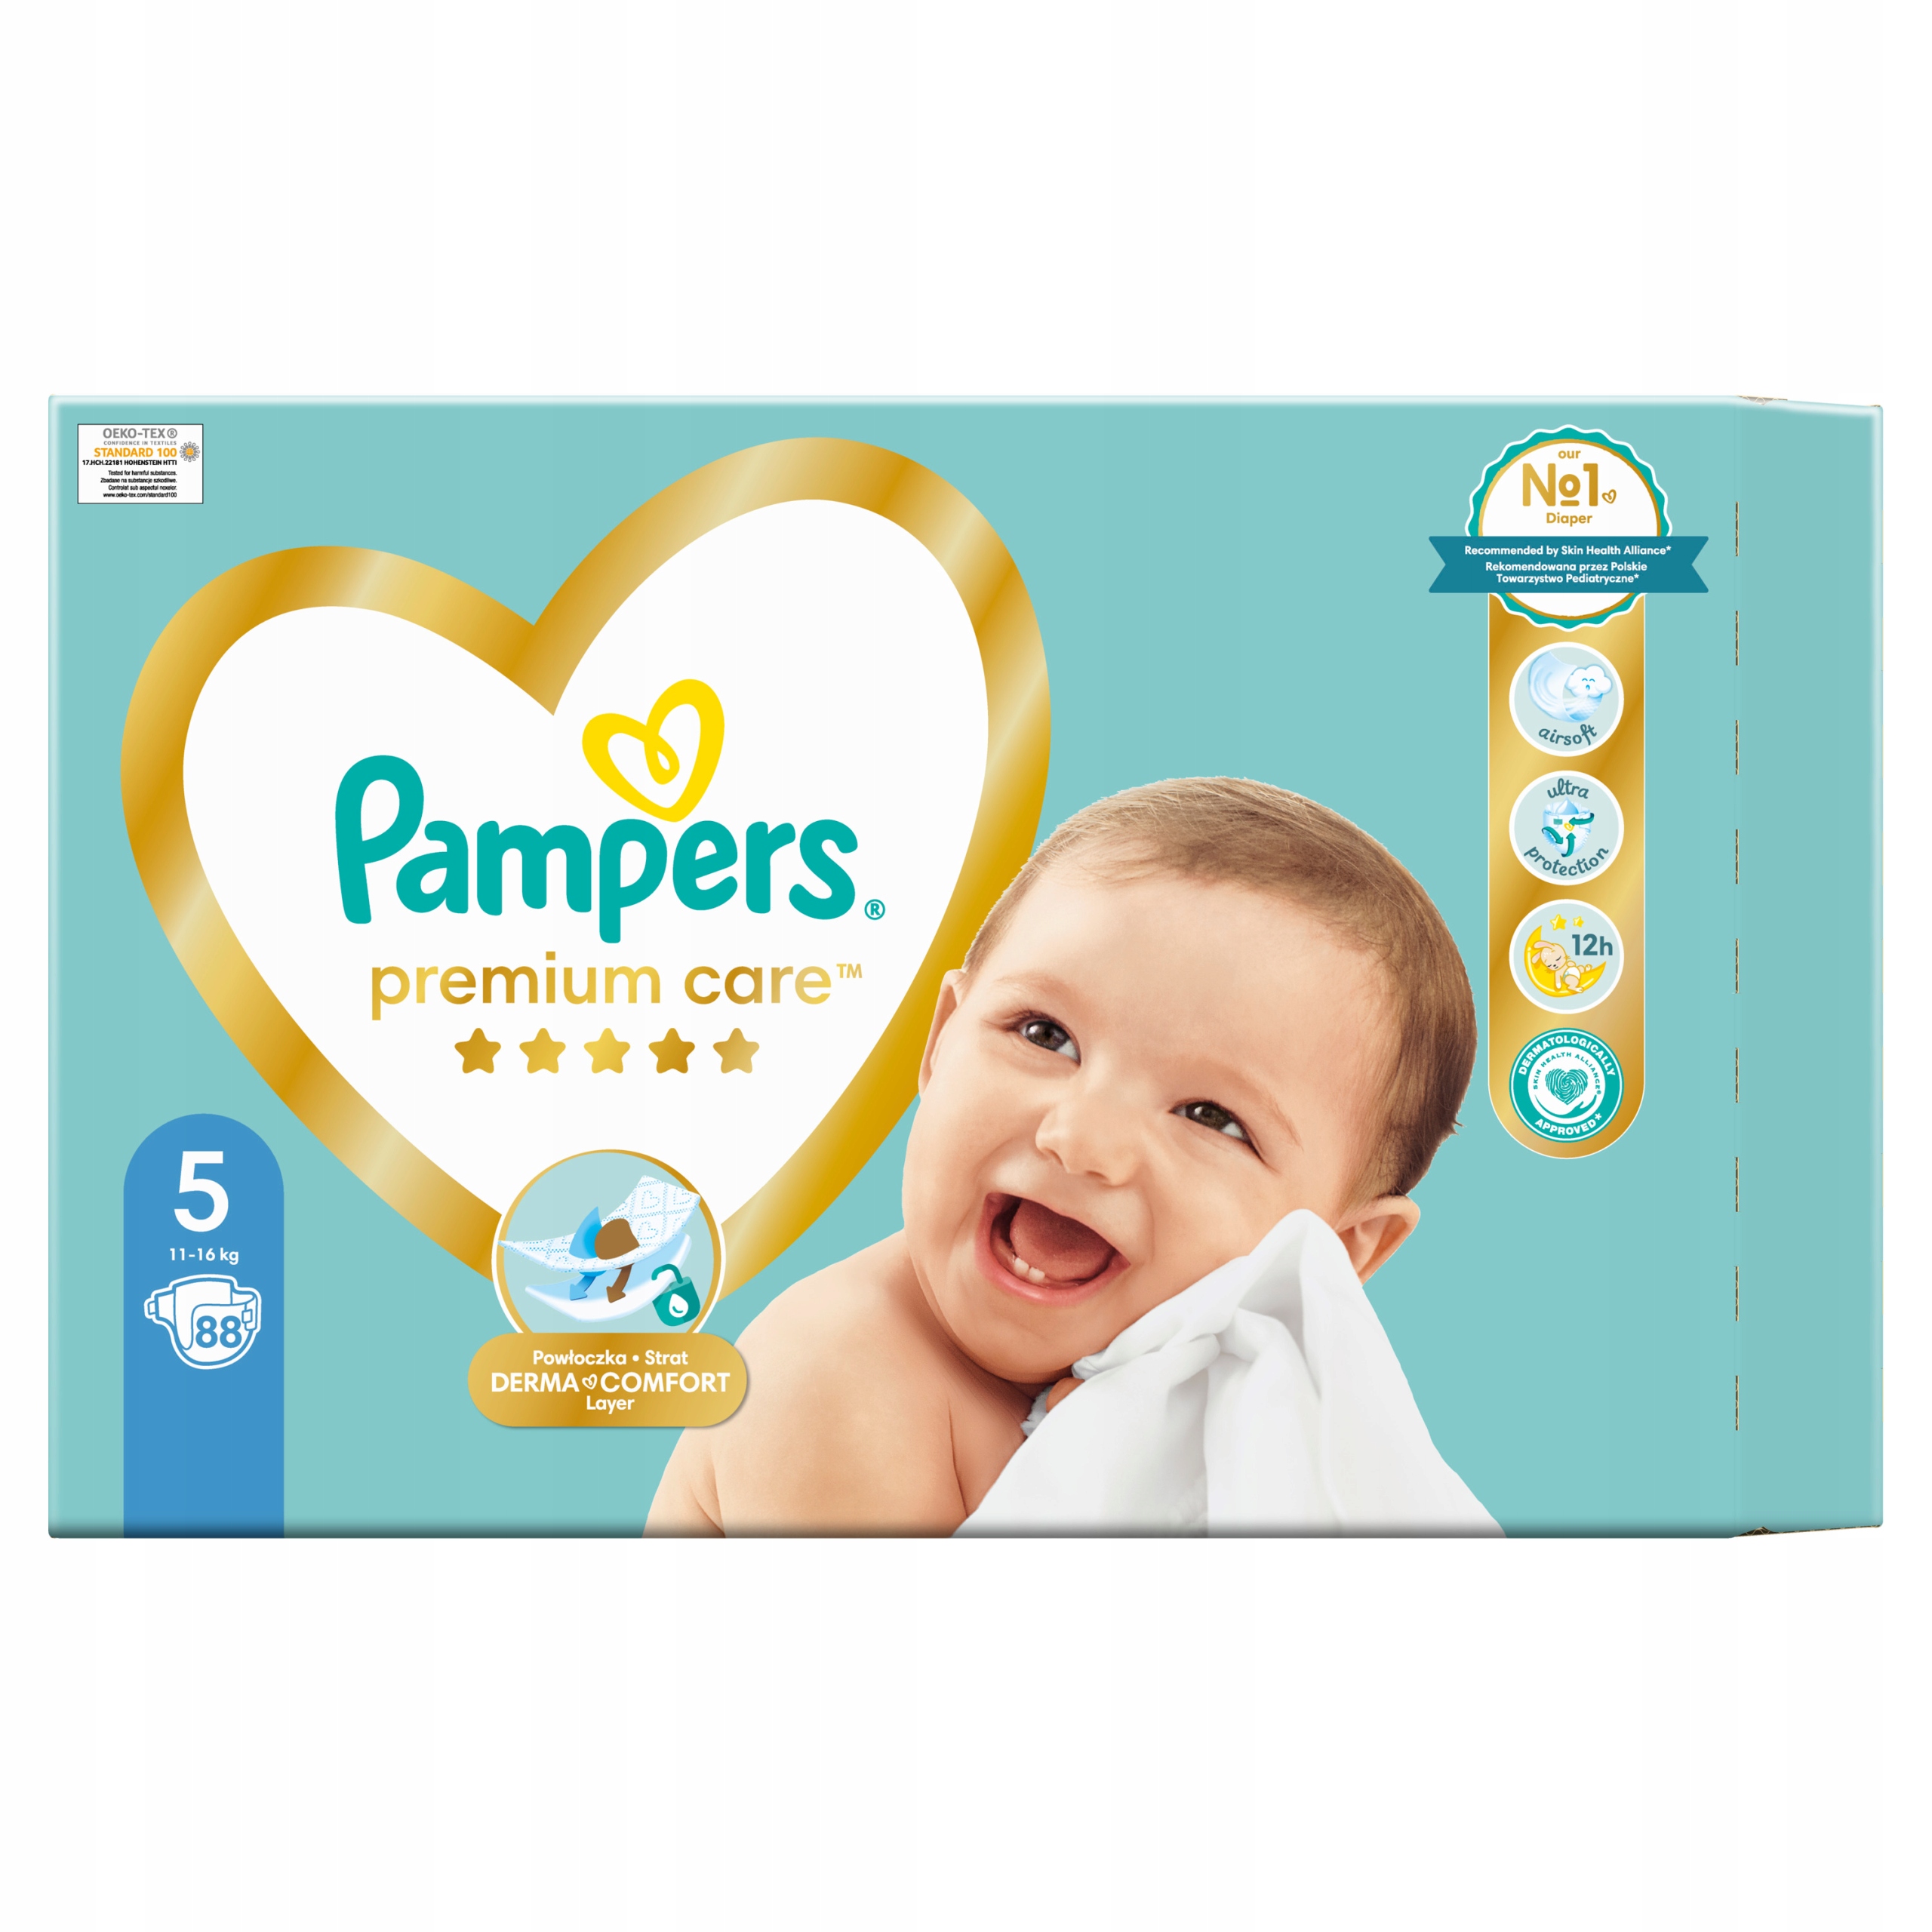 pampers sleep and play junior